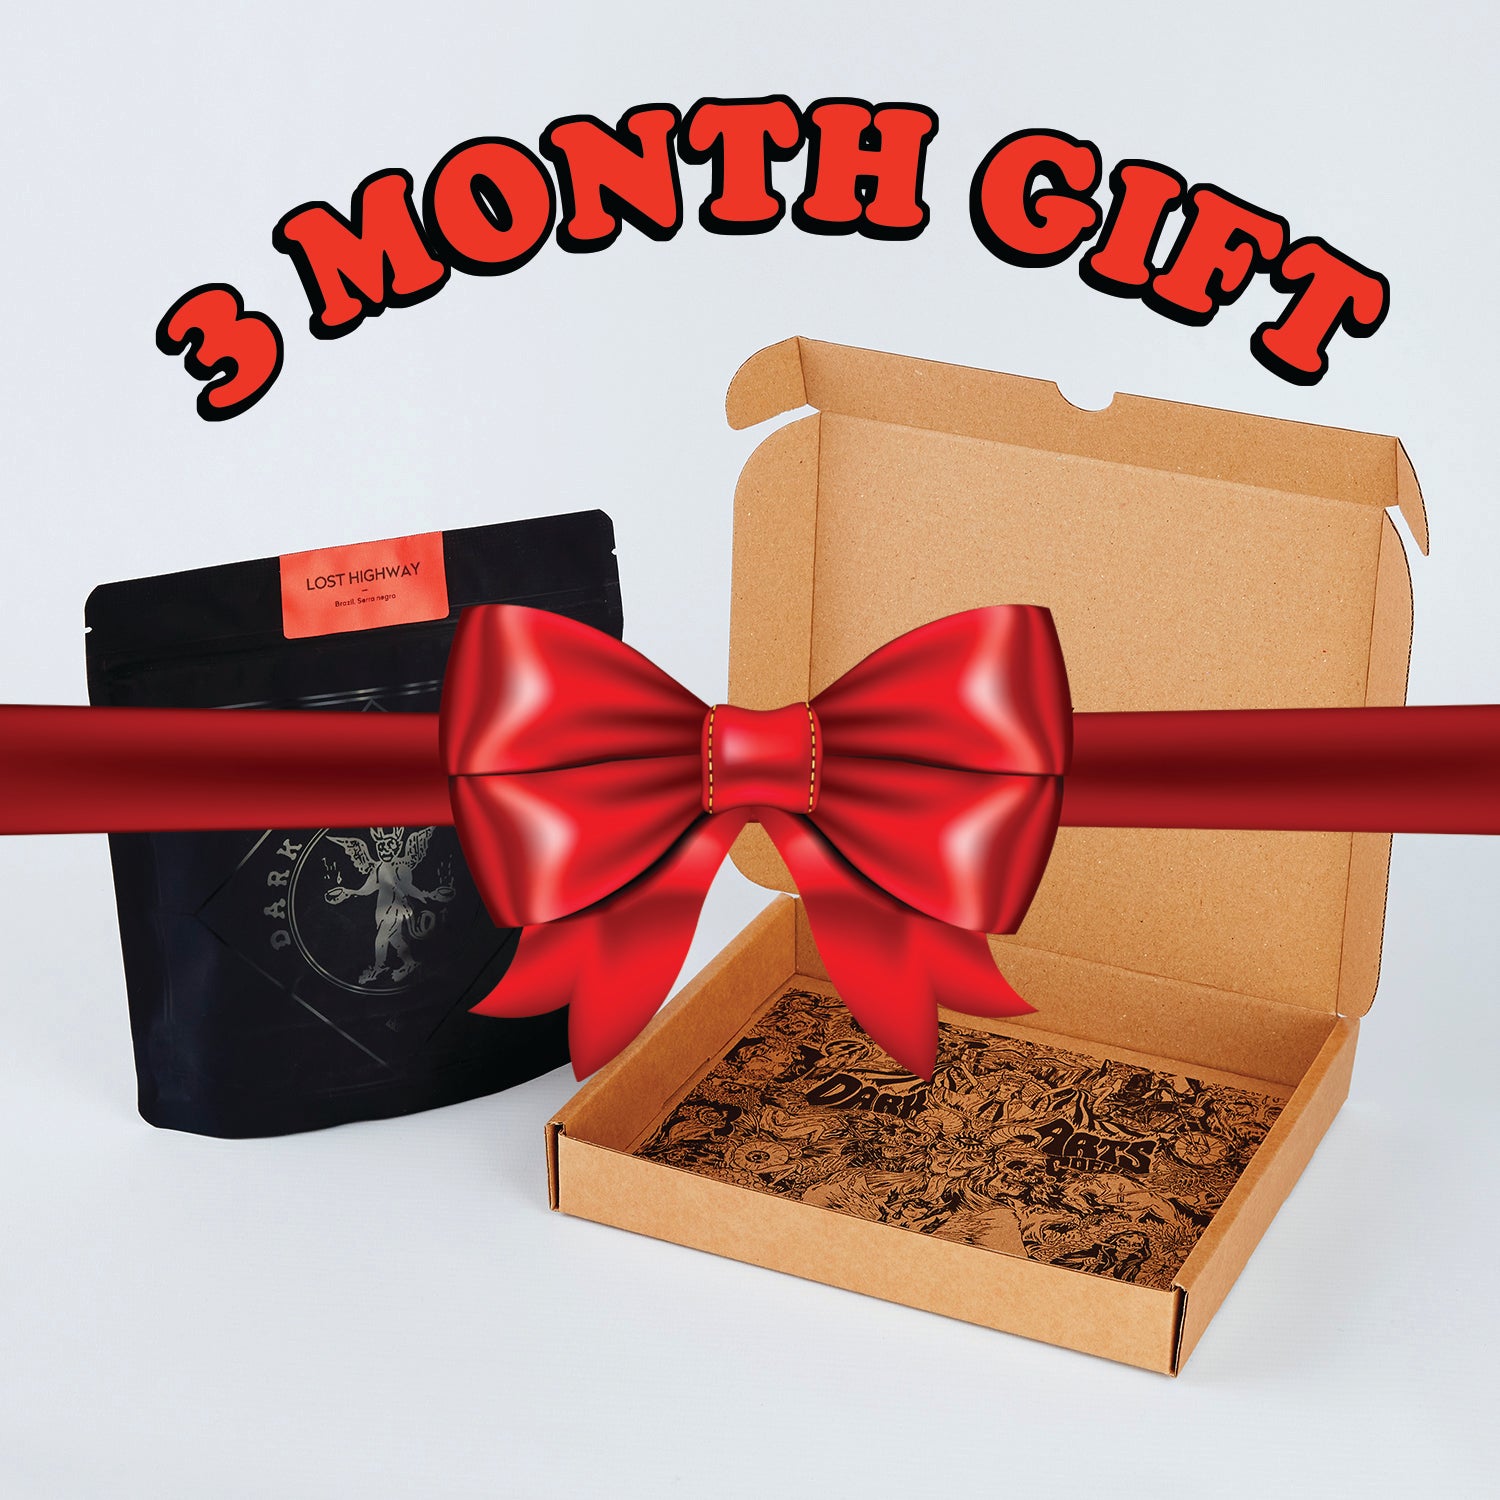 3 MONTH GIFT SUBSCRIPTION